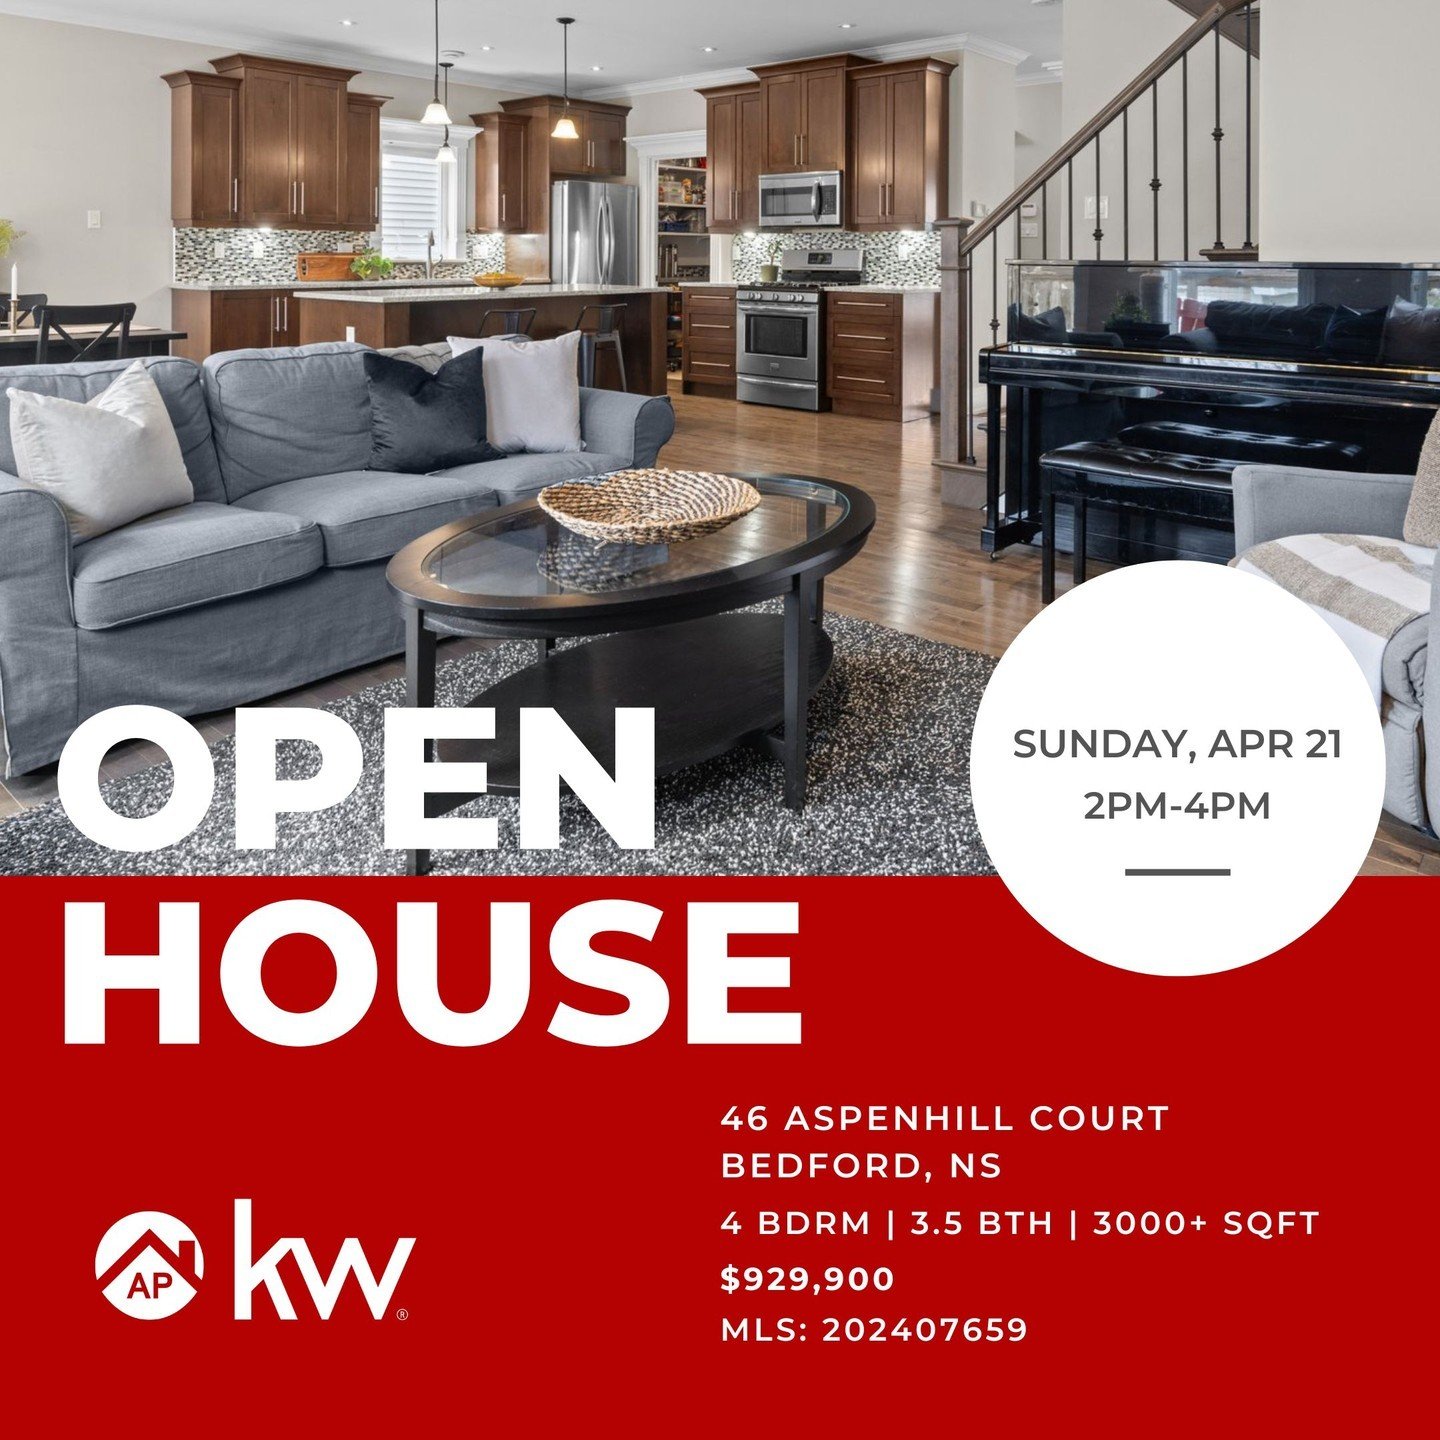 Searching for the perfect family-friendly home? Stop by our open house this Sunday! Nestled in The Parks of West Bedford, 46 Aspenhill Court offers a beautifully finished interior with space for the whole family! Generously sized bedrooms, a spacious